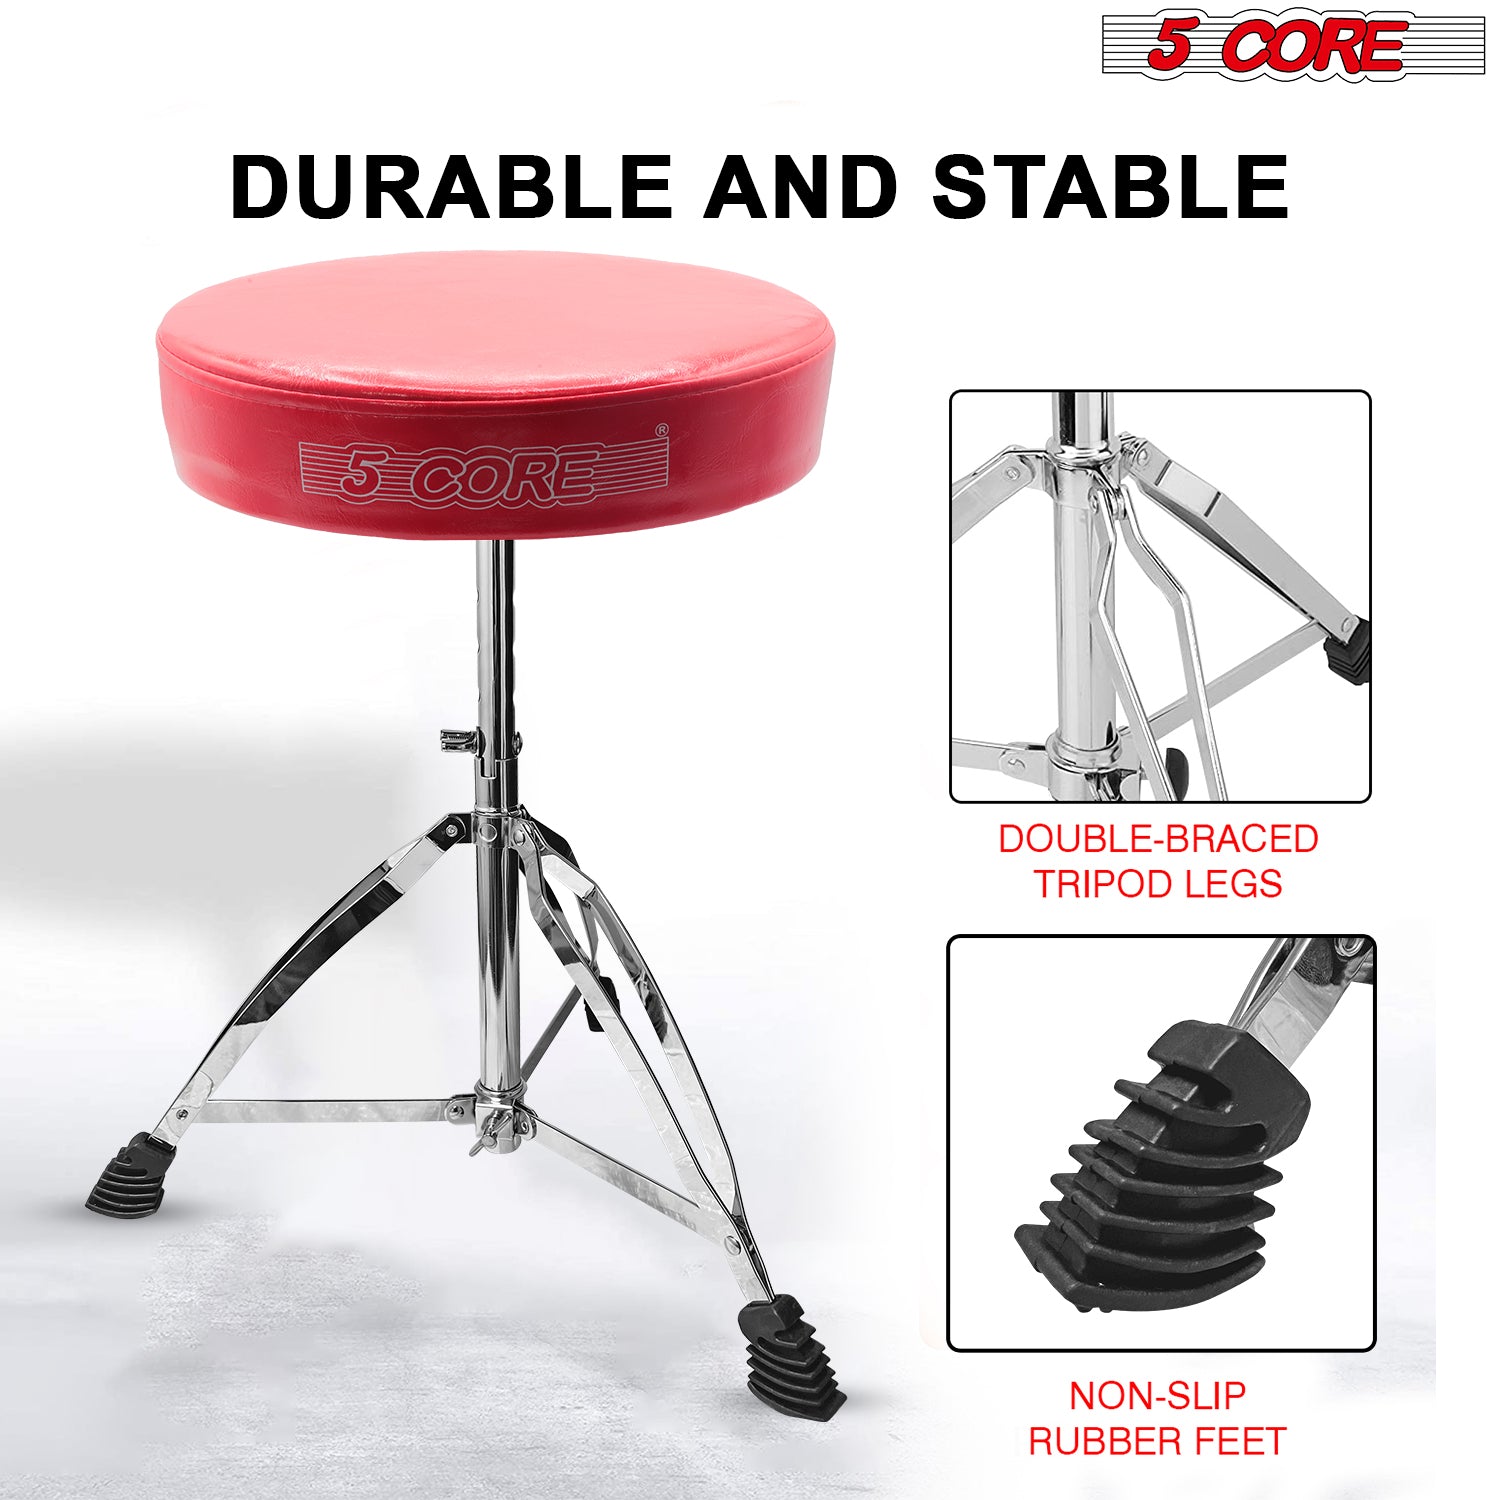 5 Core Drum Throne Brown | Height Adjustable Padded Seat Drum Stool | Folding Portable Drummer Throne with Anti-Slip Feet | with two Drumsticks, Drum Chair for Kids and Adults- DS CH RED